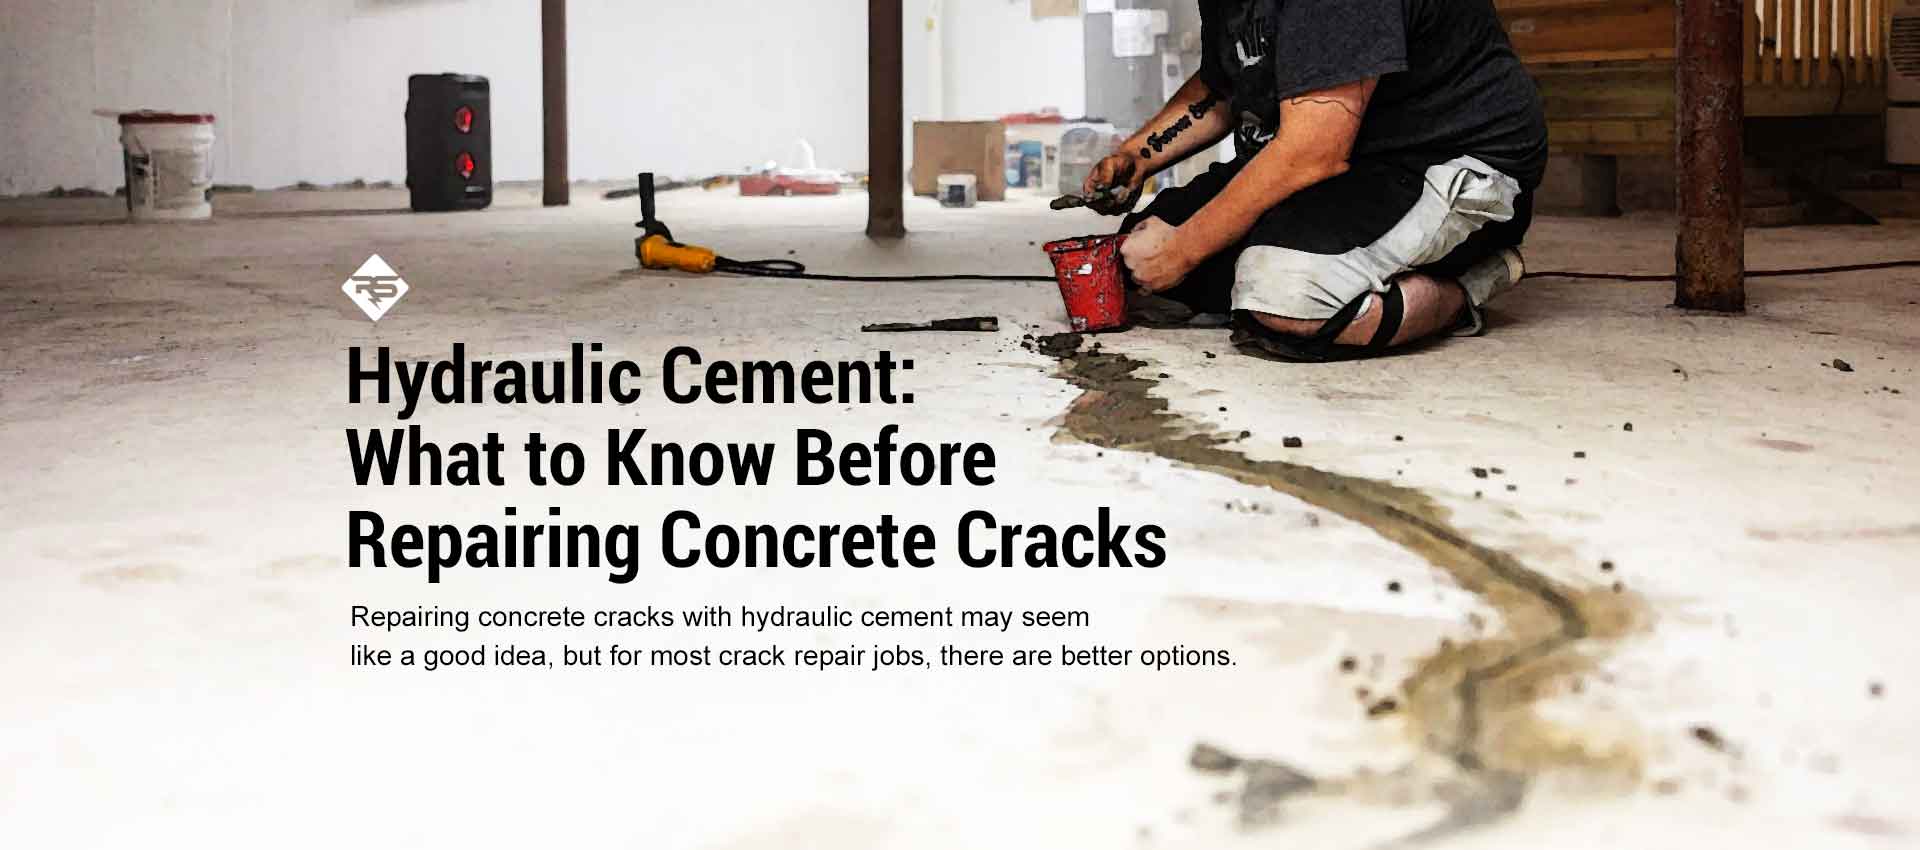 Hydraulic Cement: What to Know Before Repairing Concrete Cracks